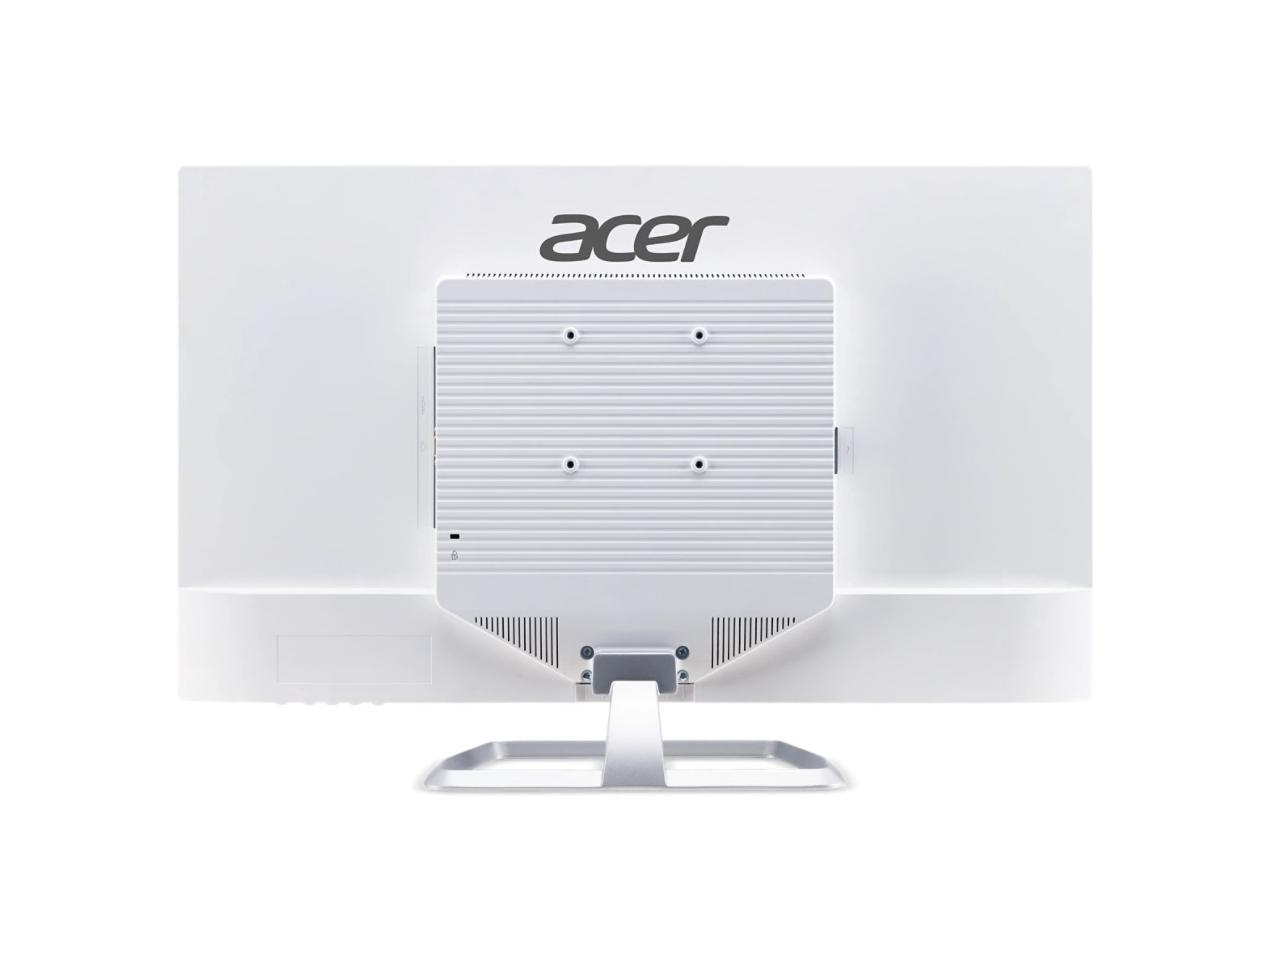 Acer Office Professional EB321HQ Awi 32" IPS 1920x1080 Low Blue Light and Flicker-Less VESA wall Mounting Monitor, VGA, HDMI - image 4 of 6